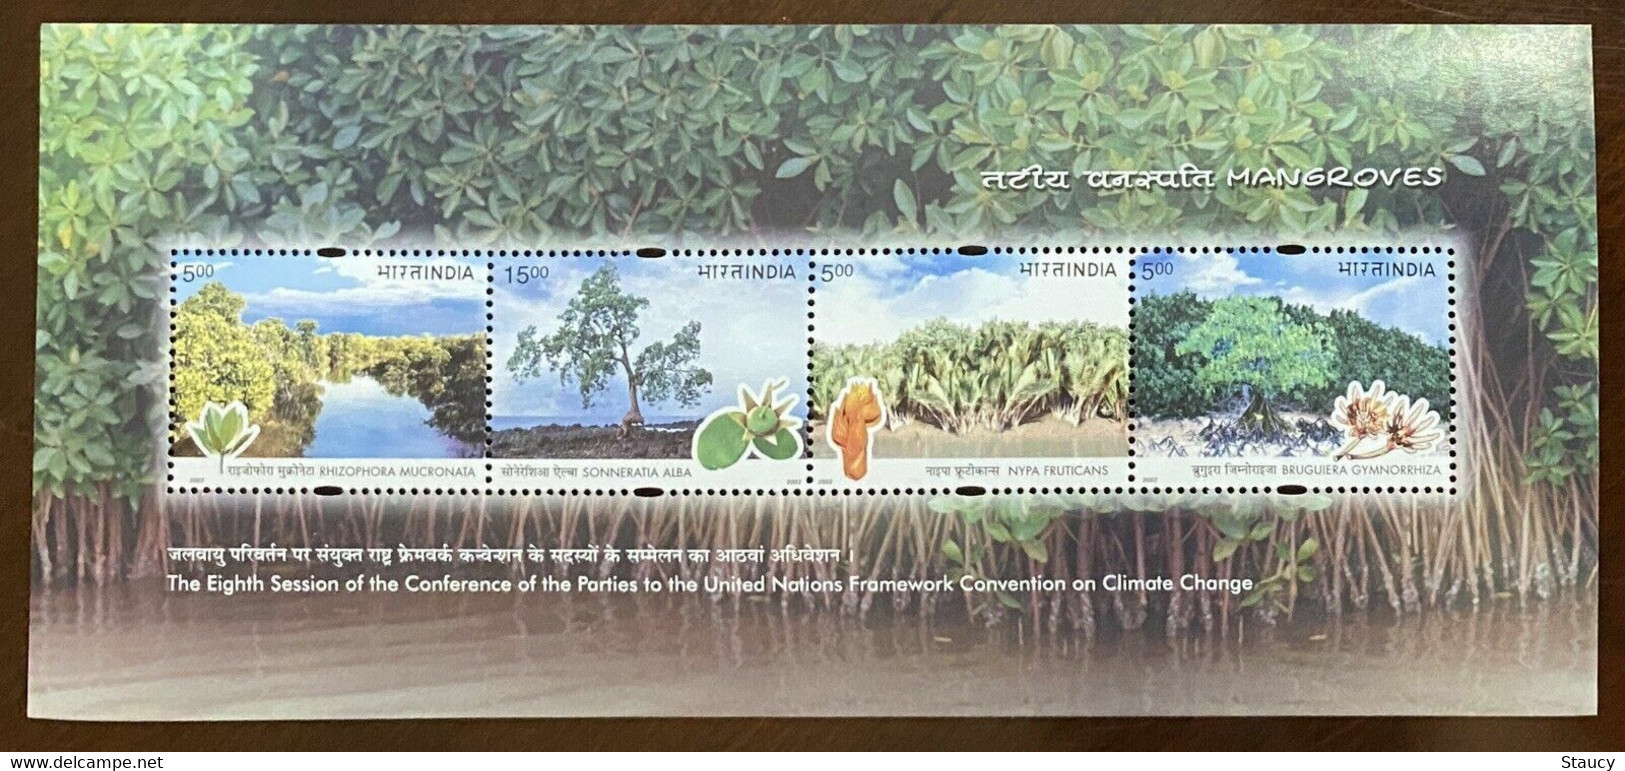 India 2002 Complete/ Full Set 4 Mini/ Miniature Sheets Year Pack Mangroves Railways Handicrafts MS MNH As Per Scan - Annate Complete